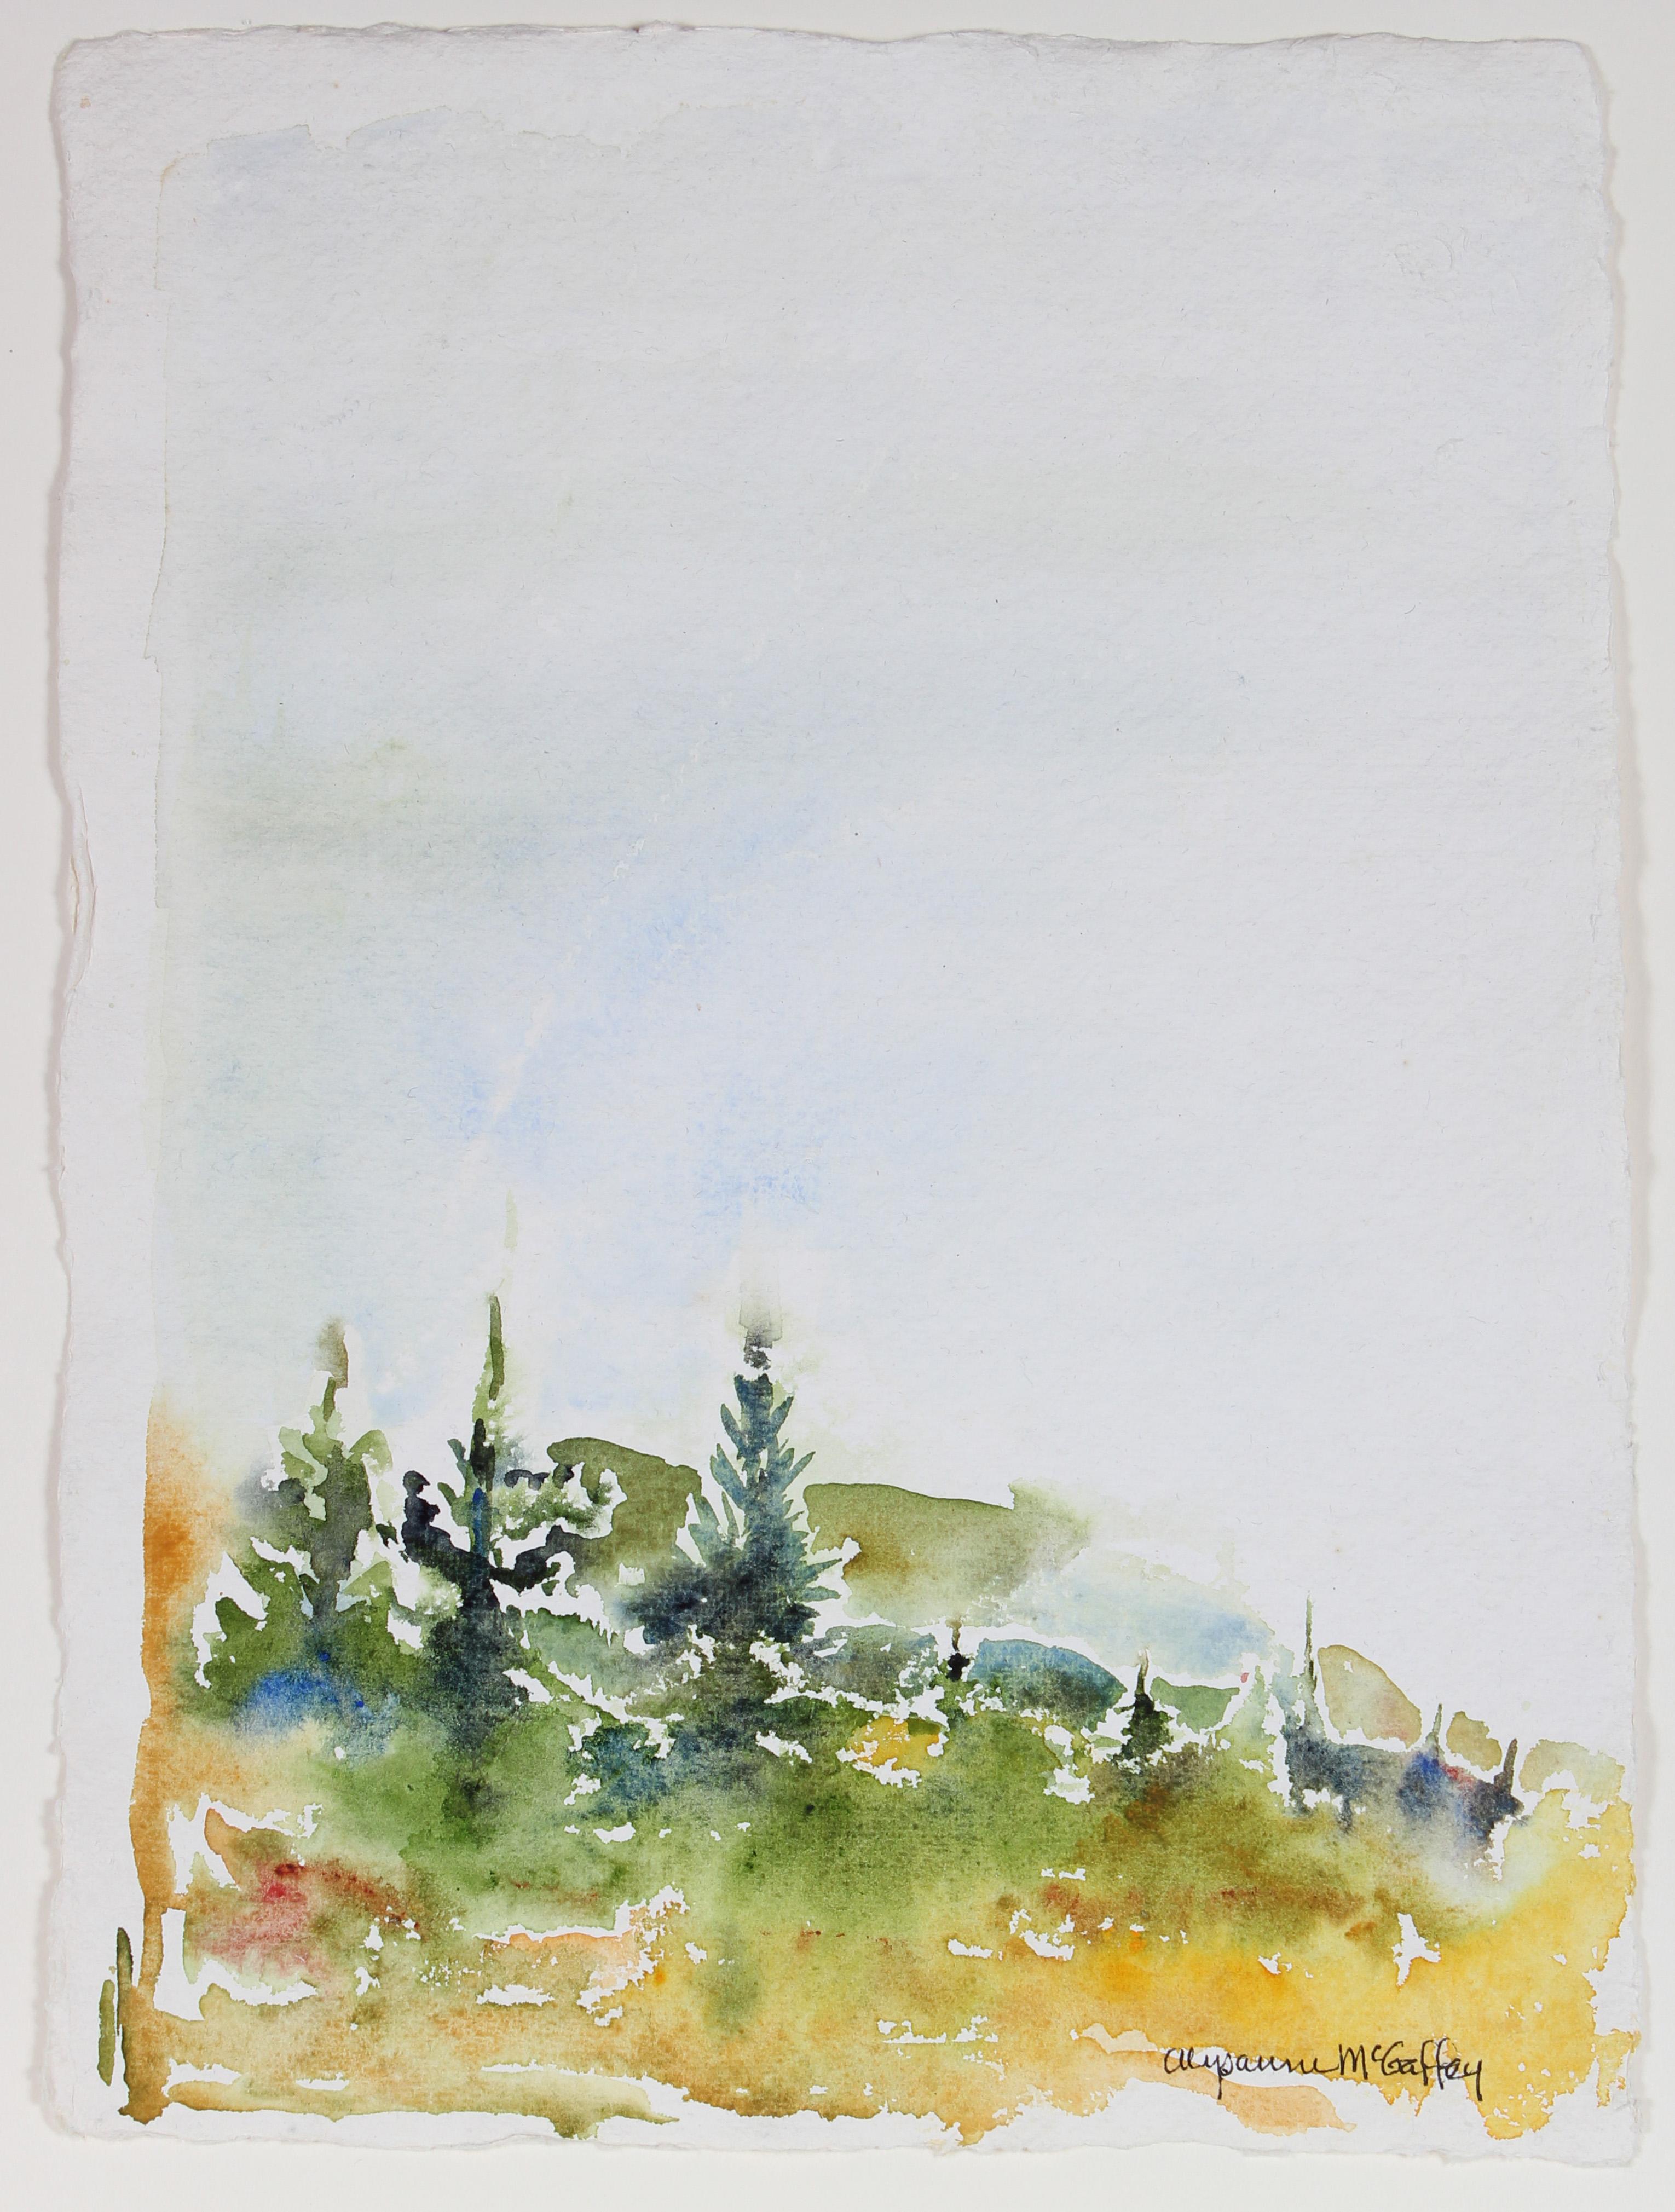 Organic Northern California Landscape with Tress, Watercolor Painting - Art by Alysanne McGaffey